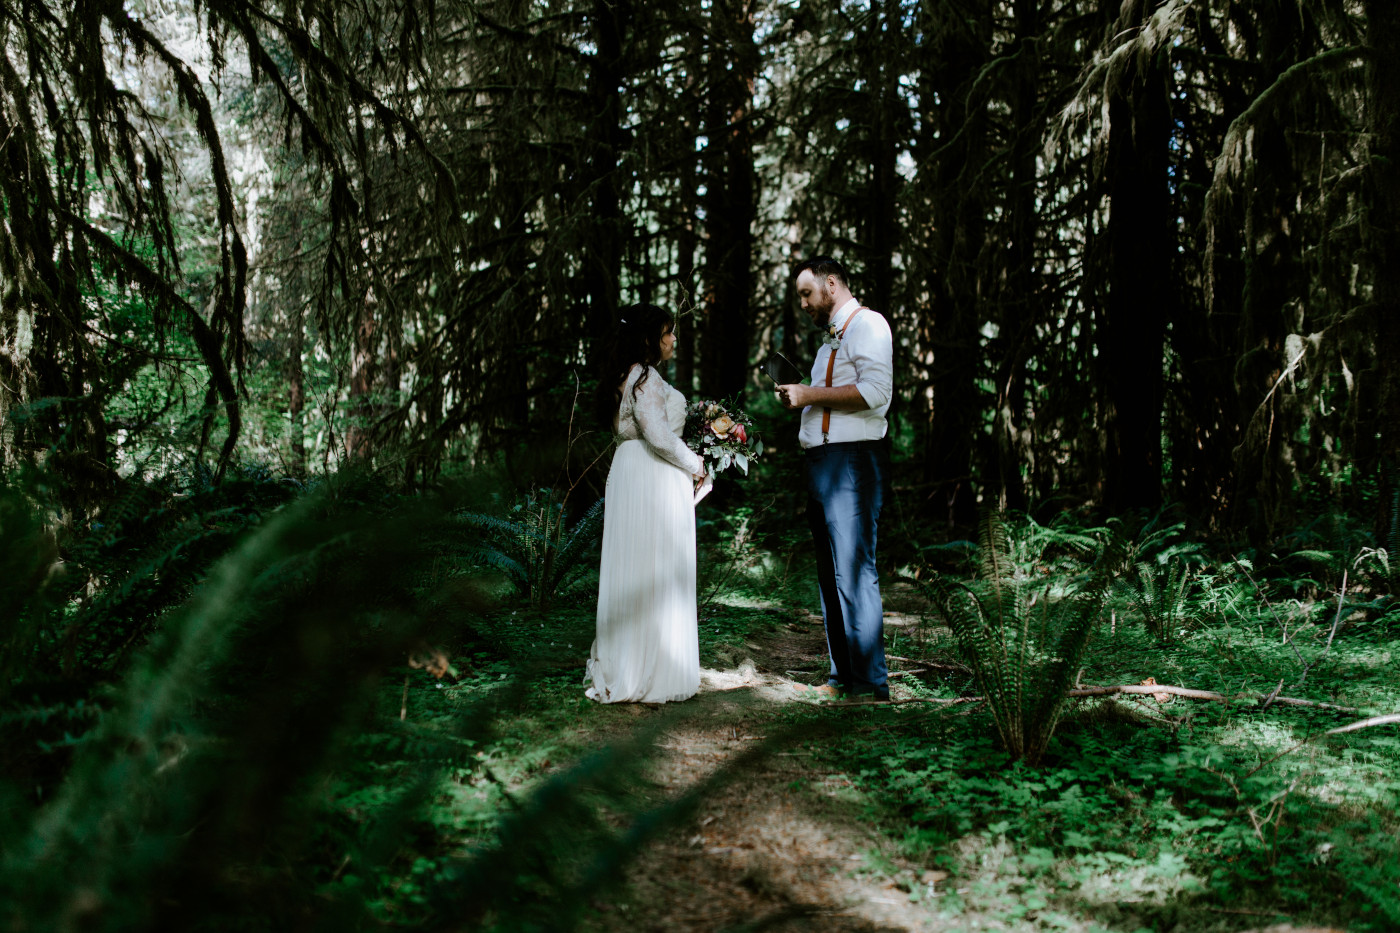 Brooke and Jack read vows to each other in the middle of the Hoh Rainforest. Elopement photography at Olympic National Park by Sienna Plus Josh.